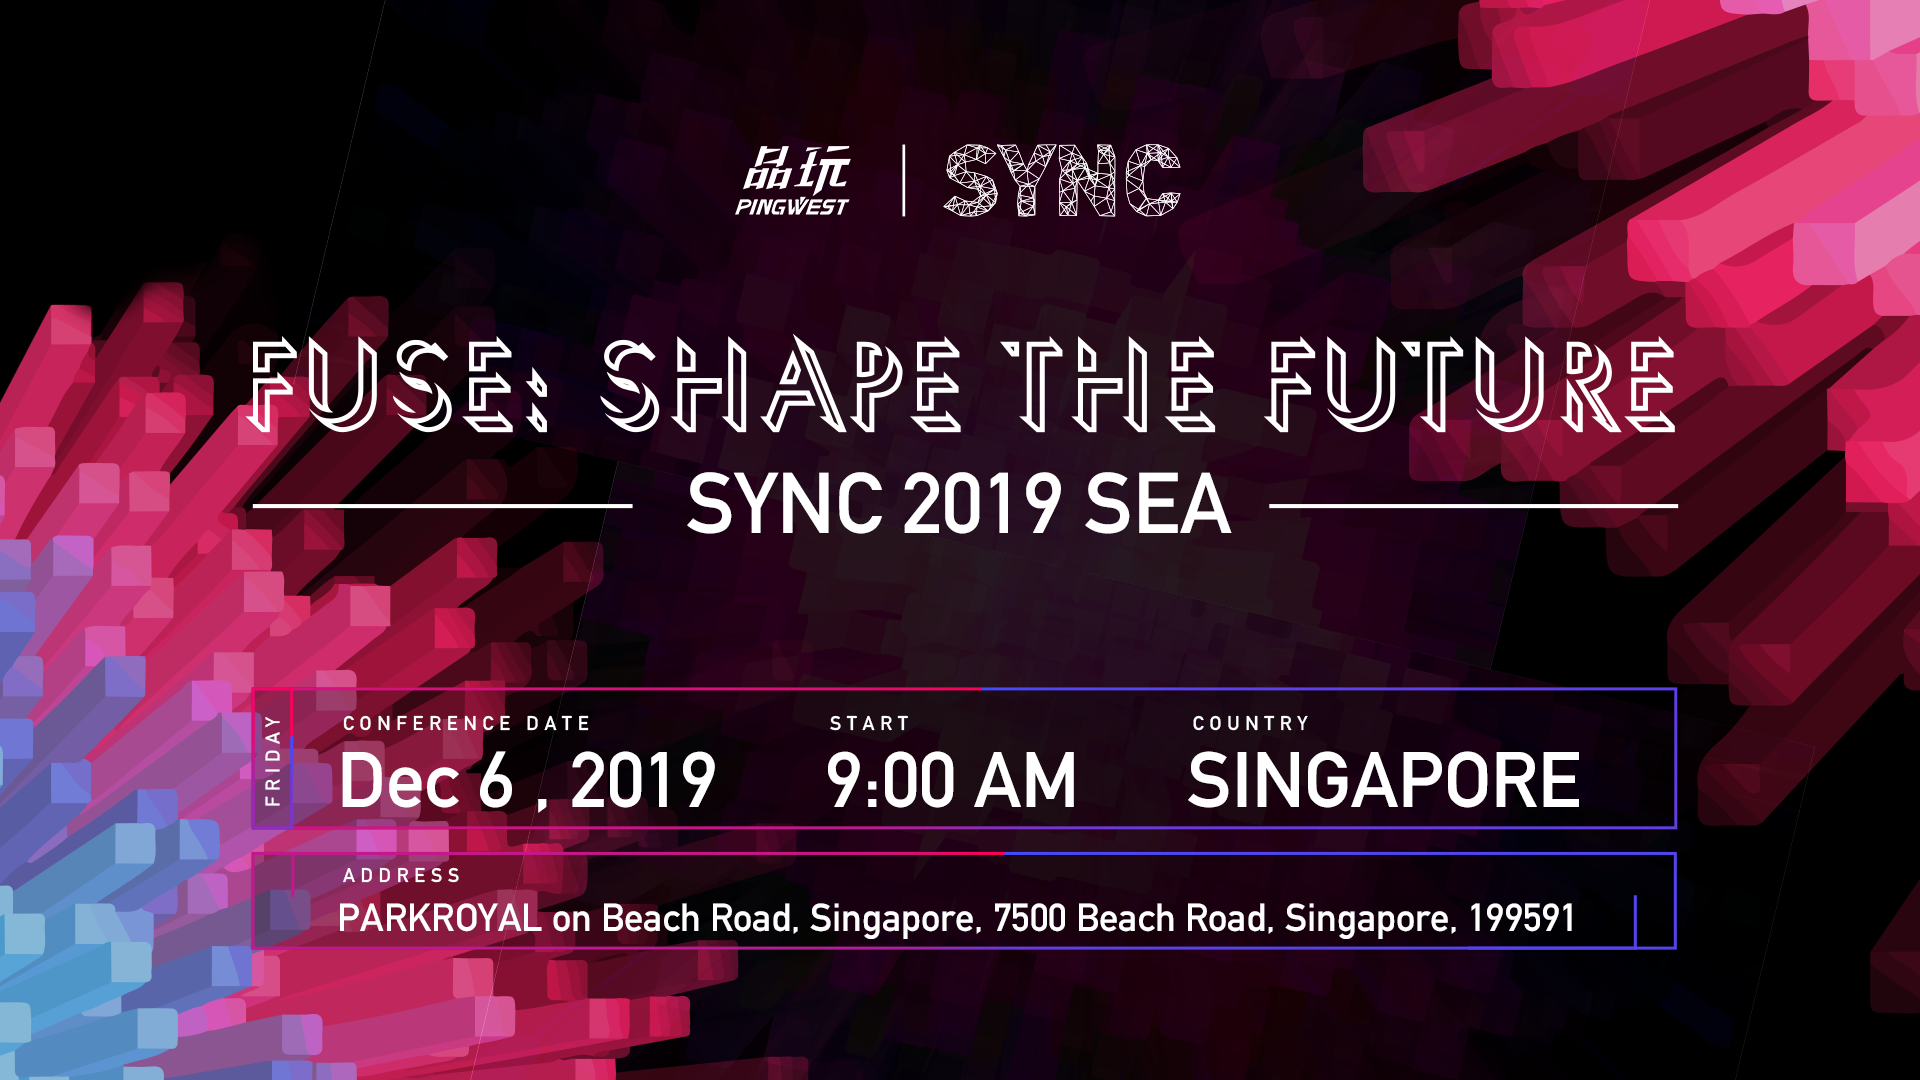 Be an early bird to experience SYNC 2019 SEA- leading tech innovation event